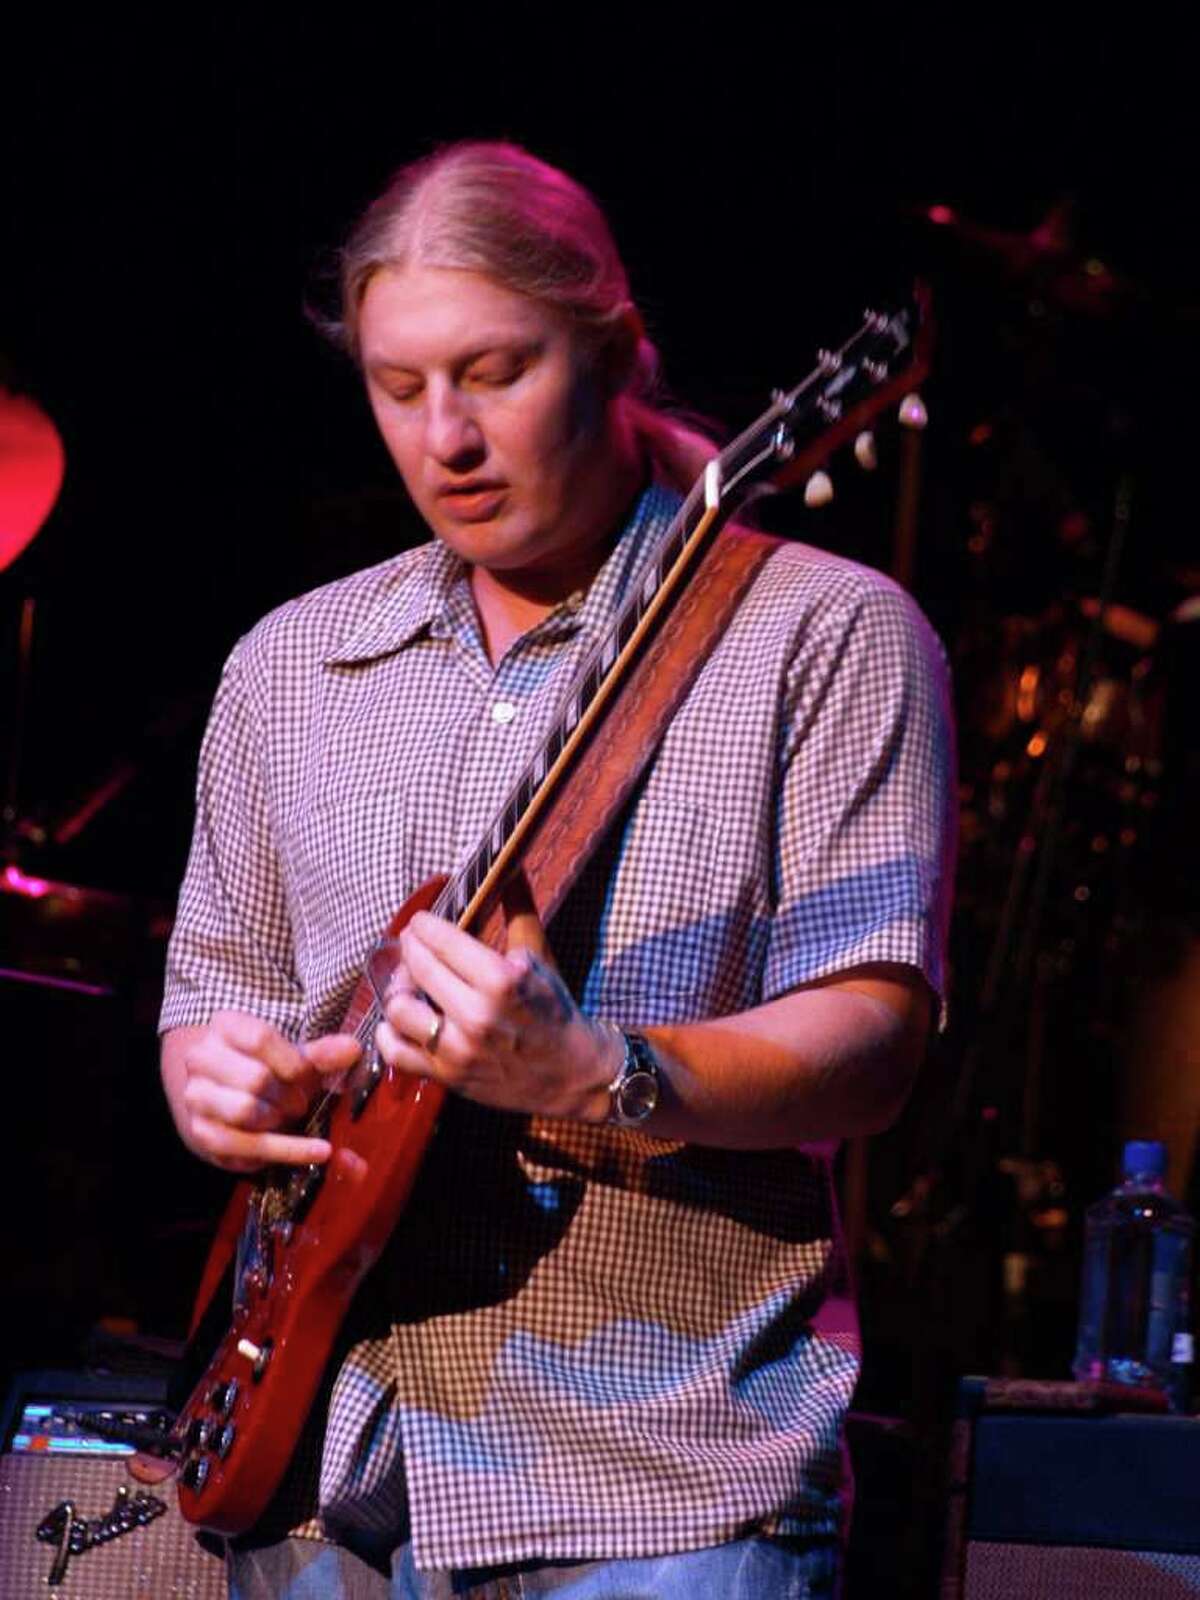 The Tedeschi Trucks Band, a husband-and-wife band made up of Derek Trucks, a Grammy-winning blues guitarist and member of the Allman Brothers, and Susan Tedeschi, a critically acclaimed soul singer who has opened for the Rolling Stones and John Mellencamp, will headline a $3,000-a-head fundraiser June 18 at the Belle Haven Club, according to the event’s invitation.